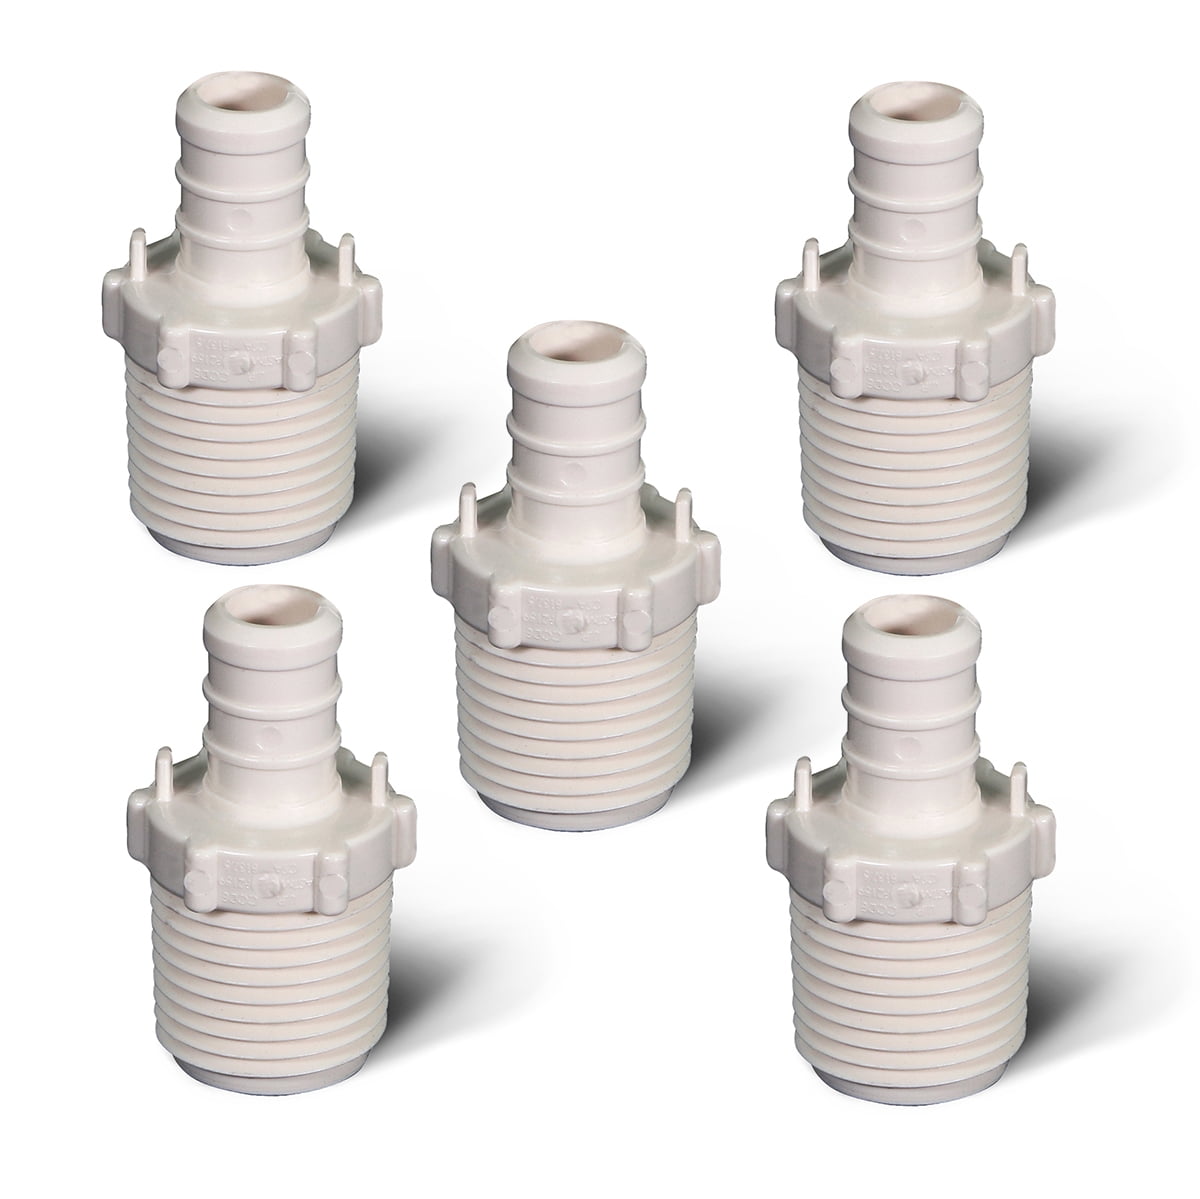 Poly Alloy Lead-Free Crimp Fittings 200 1/2" PEX Couplings 